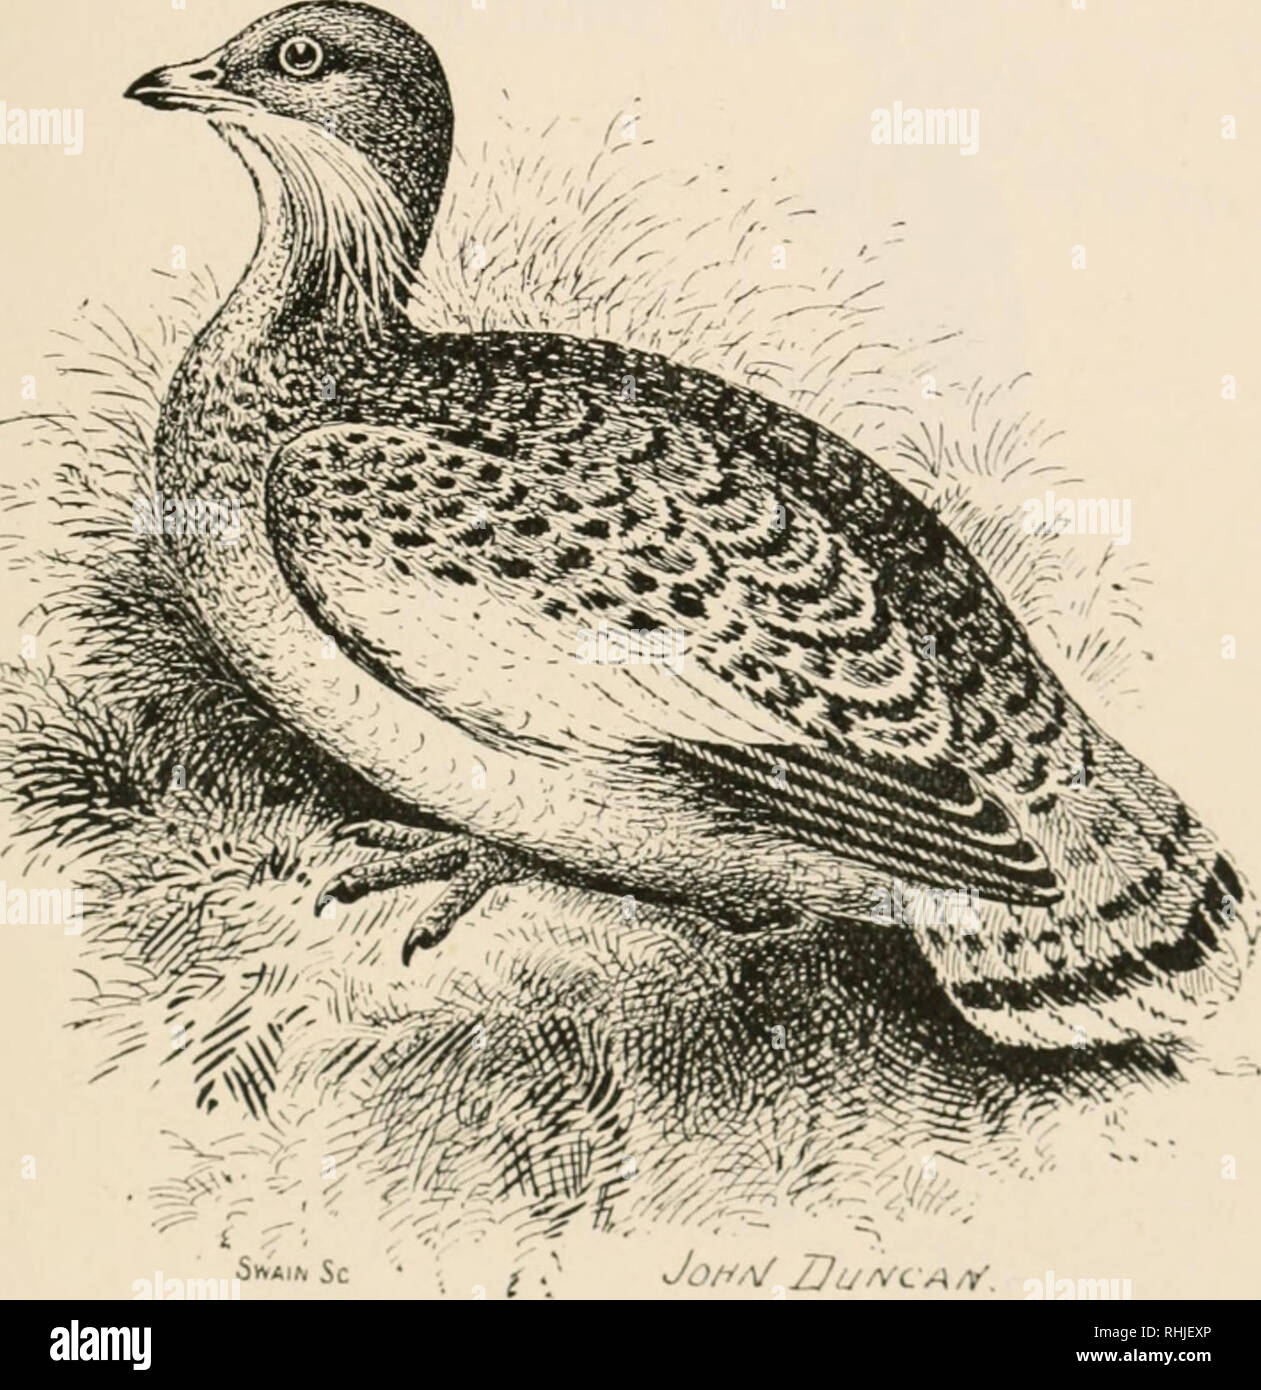 . Birds of the British Isles. Birds -- Great Britain; Birds -- Ireland. BIRDS OF THE BRITISH ISLES. 295 Great Buetarb.. ^â ^^^A&quot;^ Jof^A/ Uurvc. The Great Bustard {Otis tarda, Linnaeus), which formerly bred in, but is now only an irregular nomadic spring, autumn, and winter migrant to, the British Isles, inhabits the Southern Palearctic Region. The adult male has the head pale grey; on each side of the base of the bill is a long tuft of whitish feathers; throat and upper neck, wliite ; upper plumage, mostly yellowish-rusty or buflish- rcd, barred and otherwise variegated with brown and bla Stock Photo